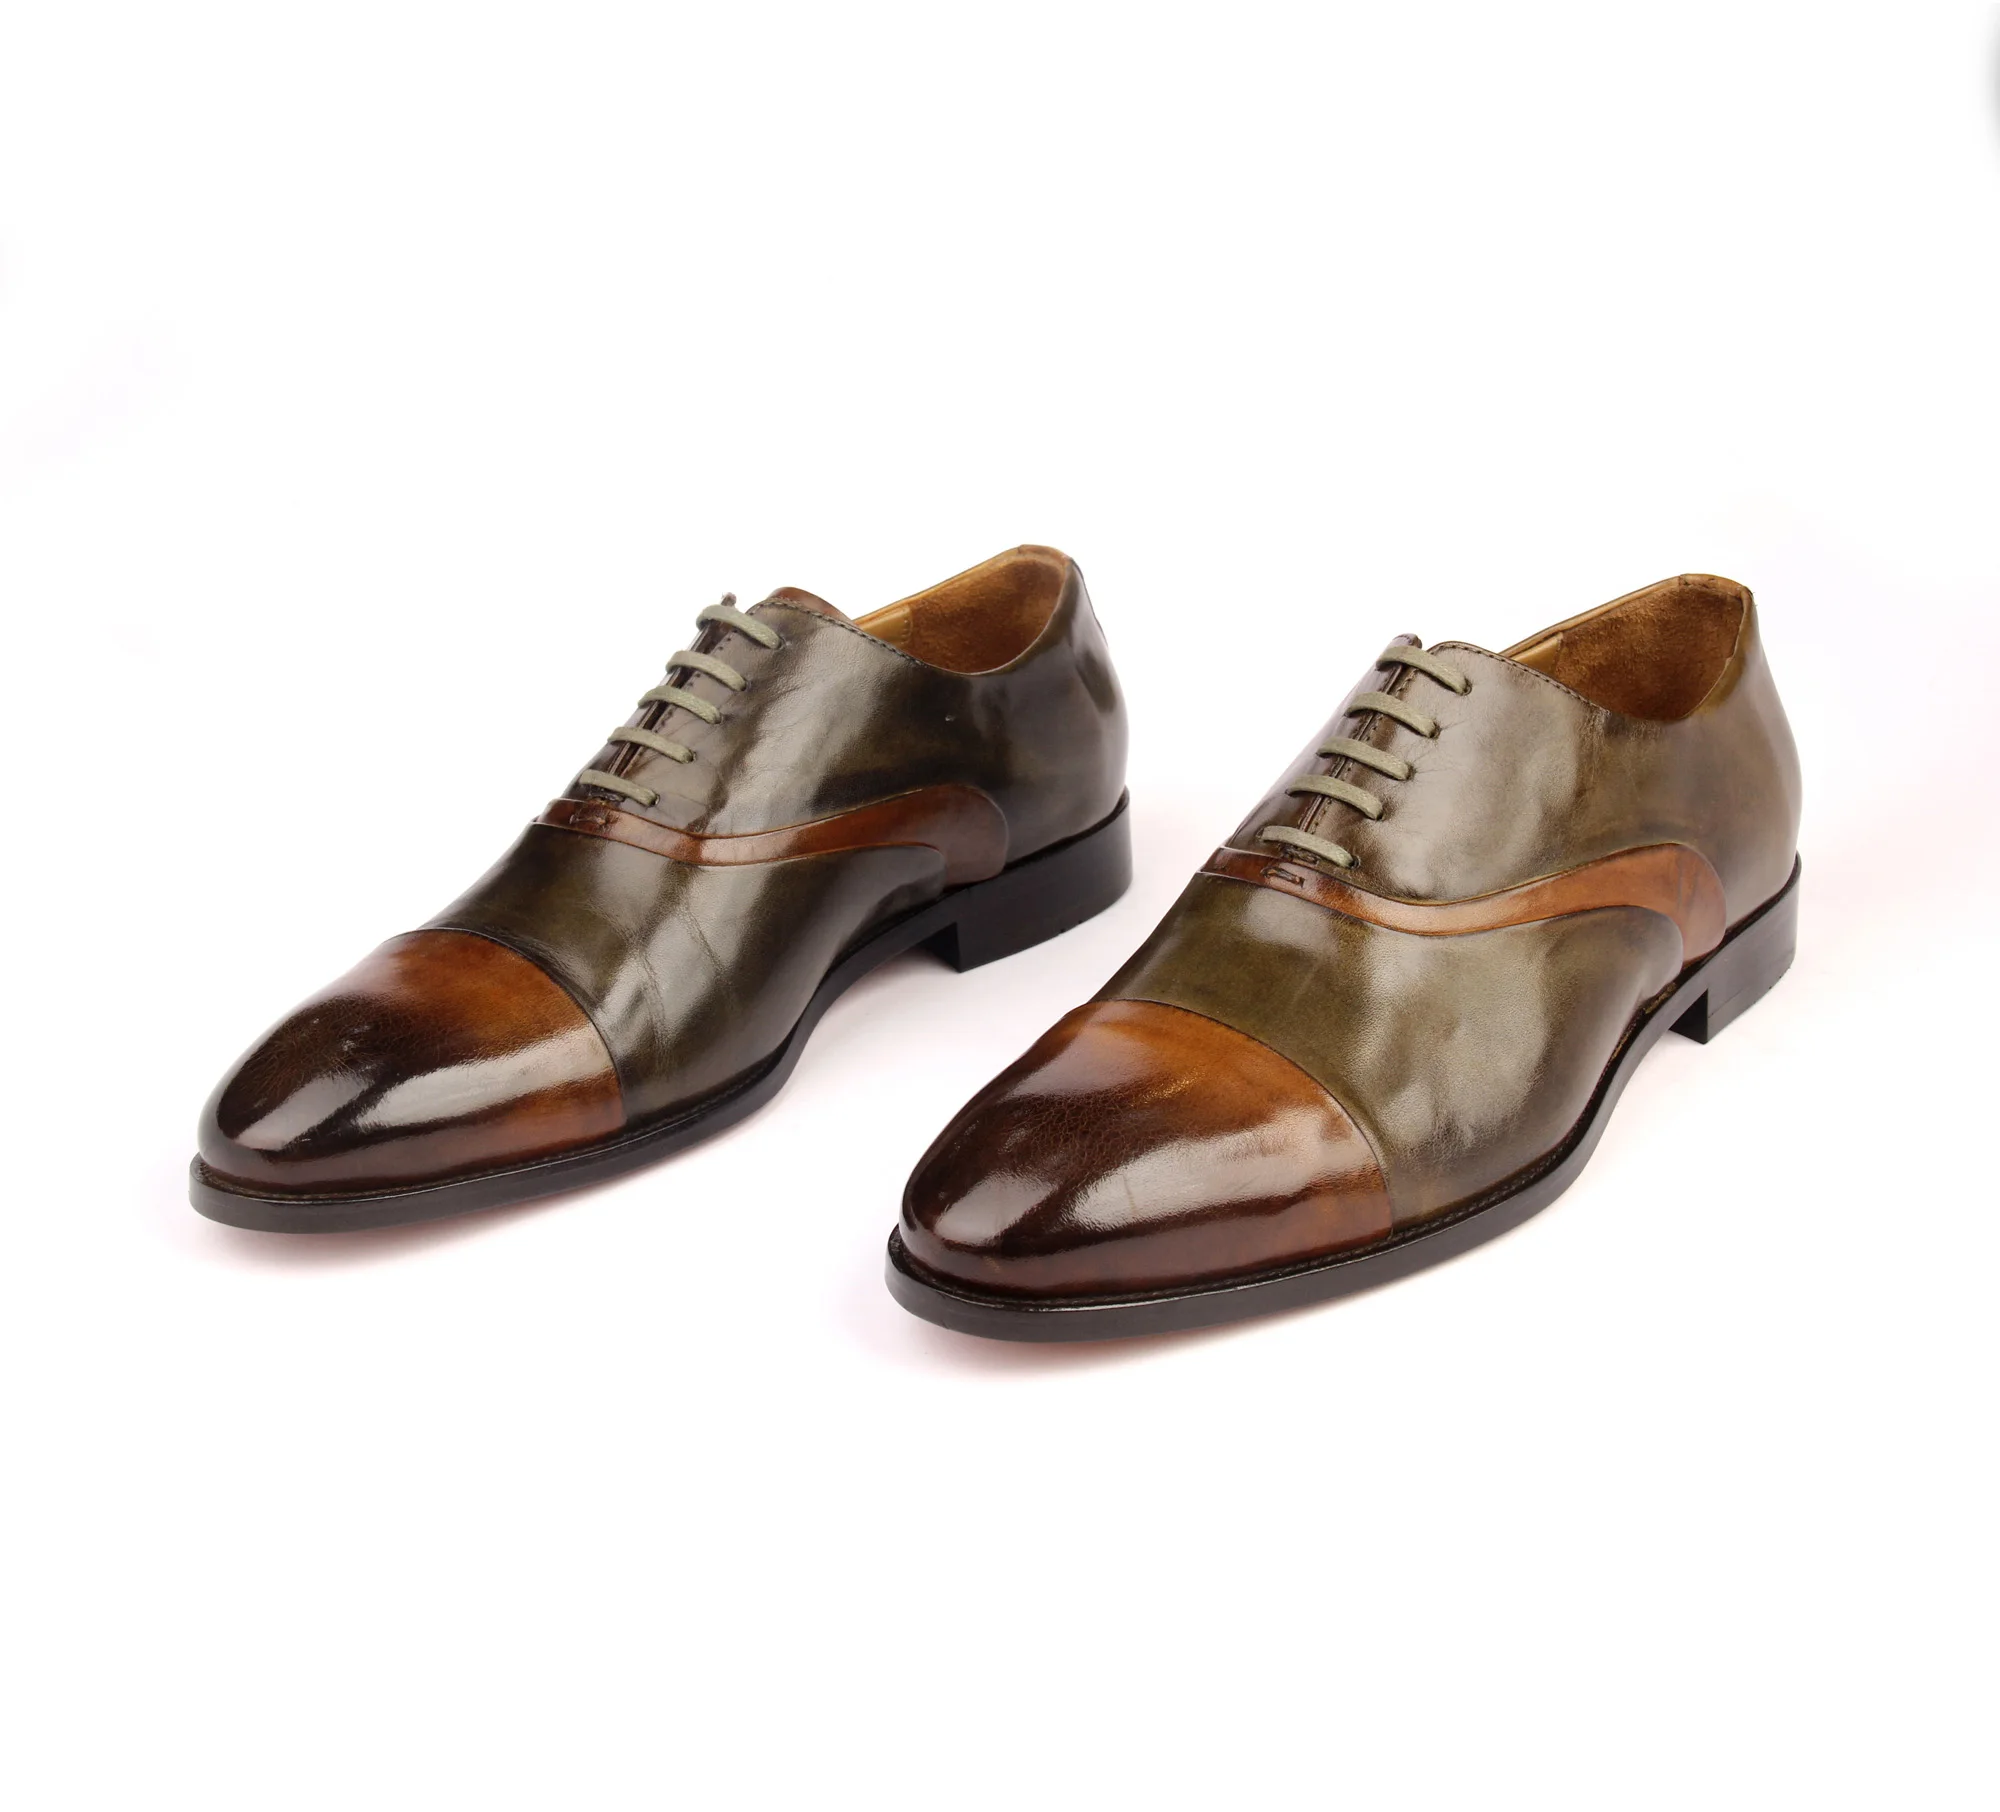 

Handmade Spectator Oxfords, Olive Green & Tobacco Shiny Classic Shoes with Real Calf Leather, Genuine Leahersole, Men's Fashion